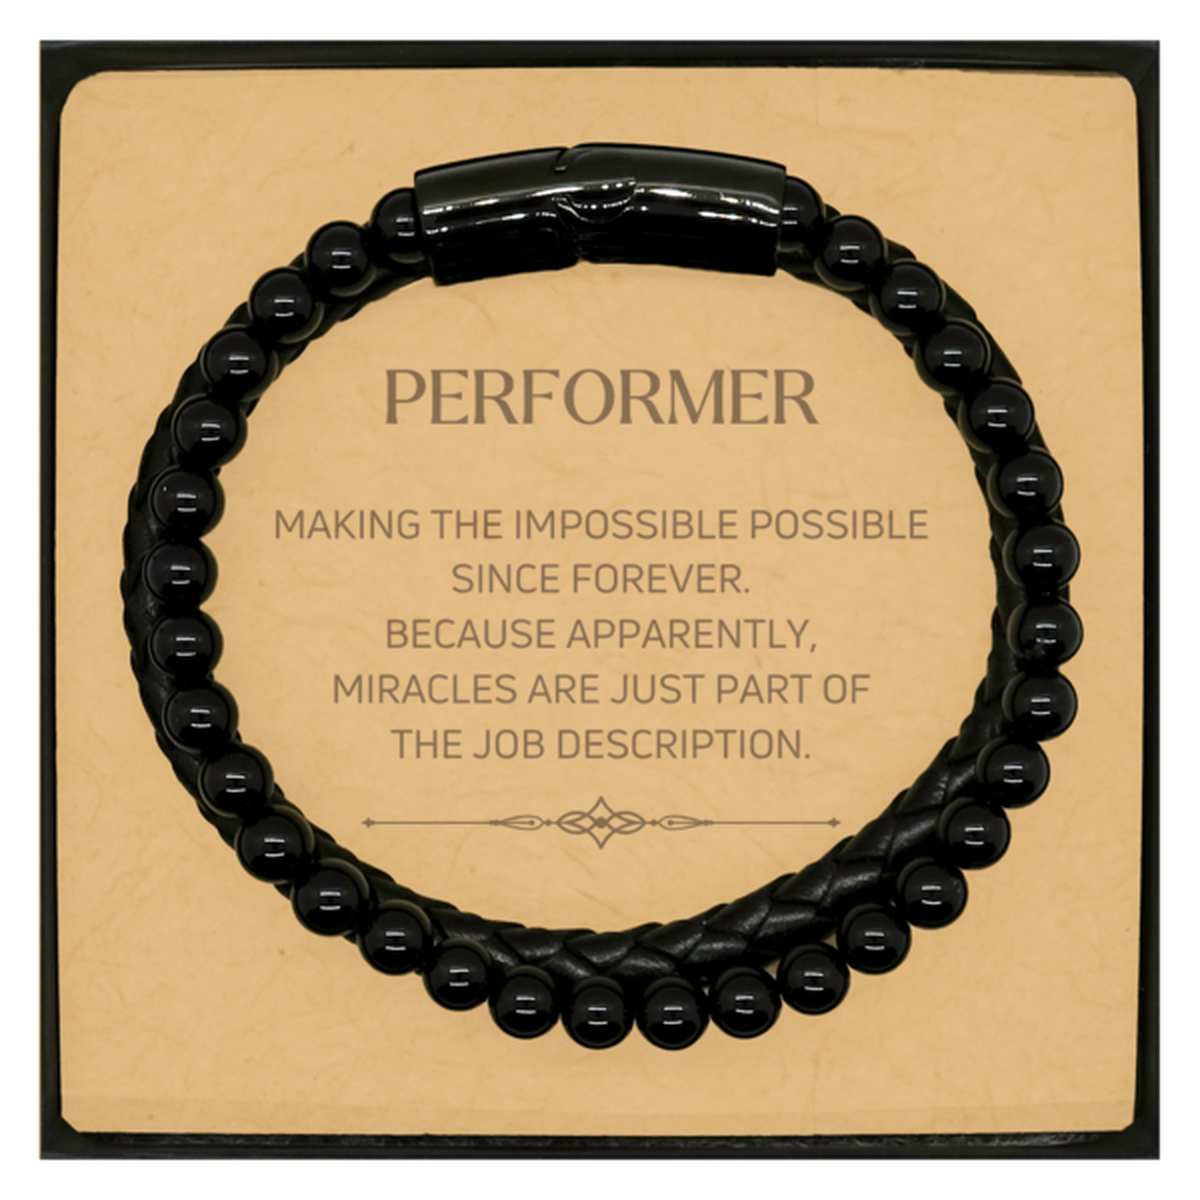 Funny Performer Gifts, Miracles are just part of the job description, Inspirational Birthday Christmas Stone Leather Bracelets For Performer, Men, Women, Coworkers, Friends, Boss